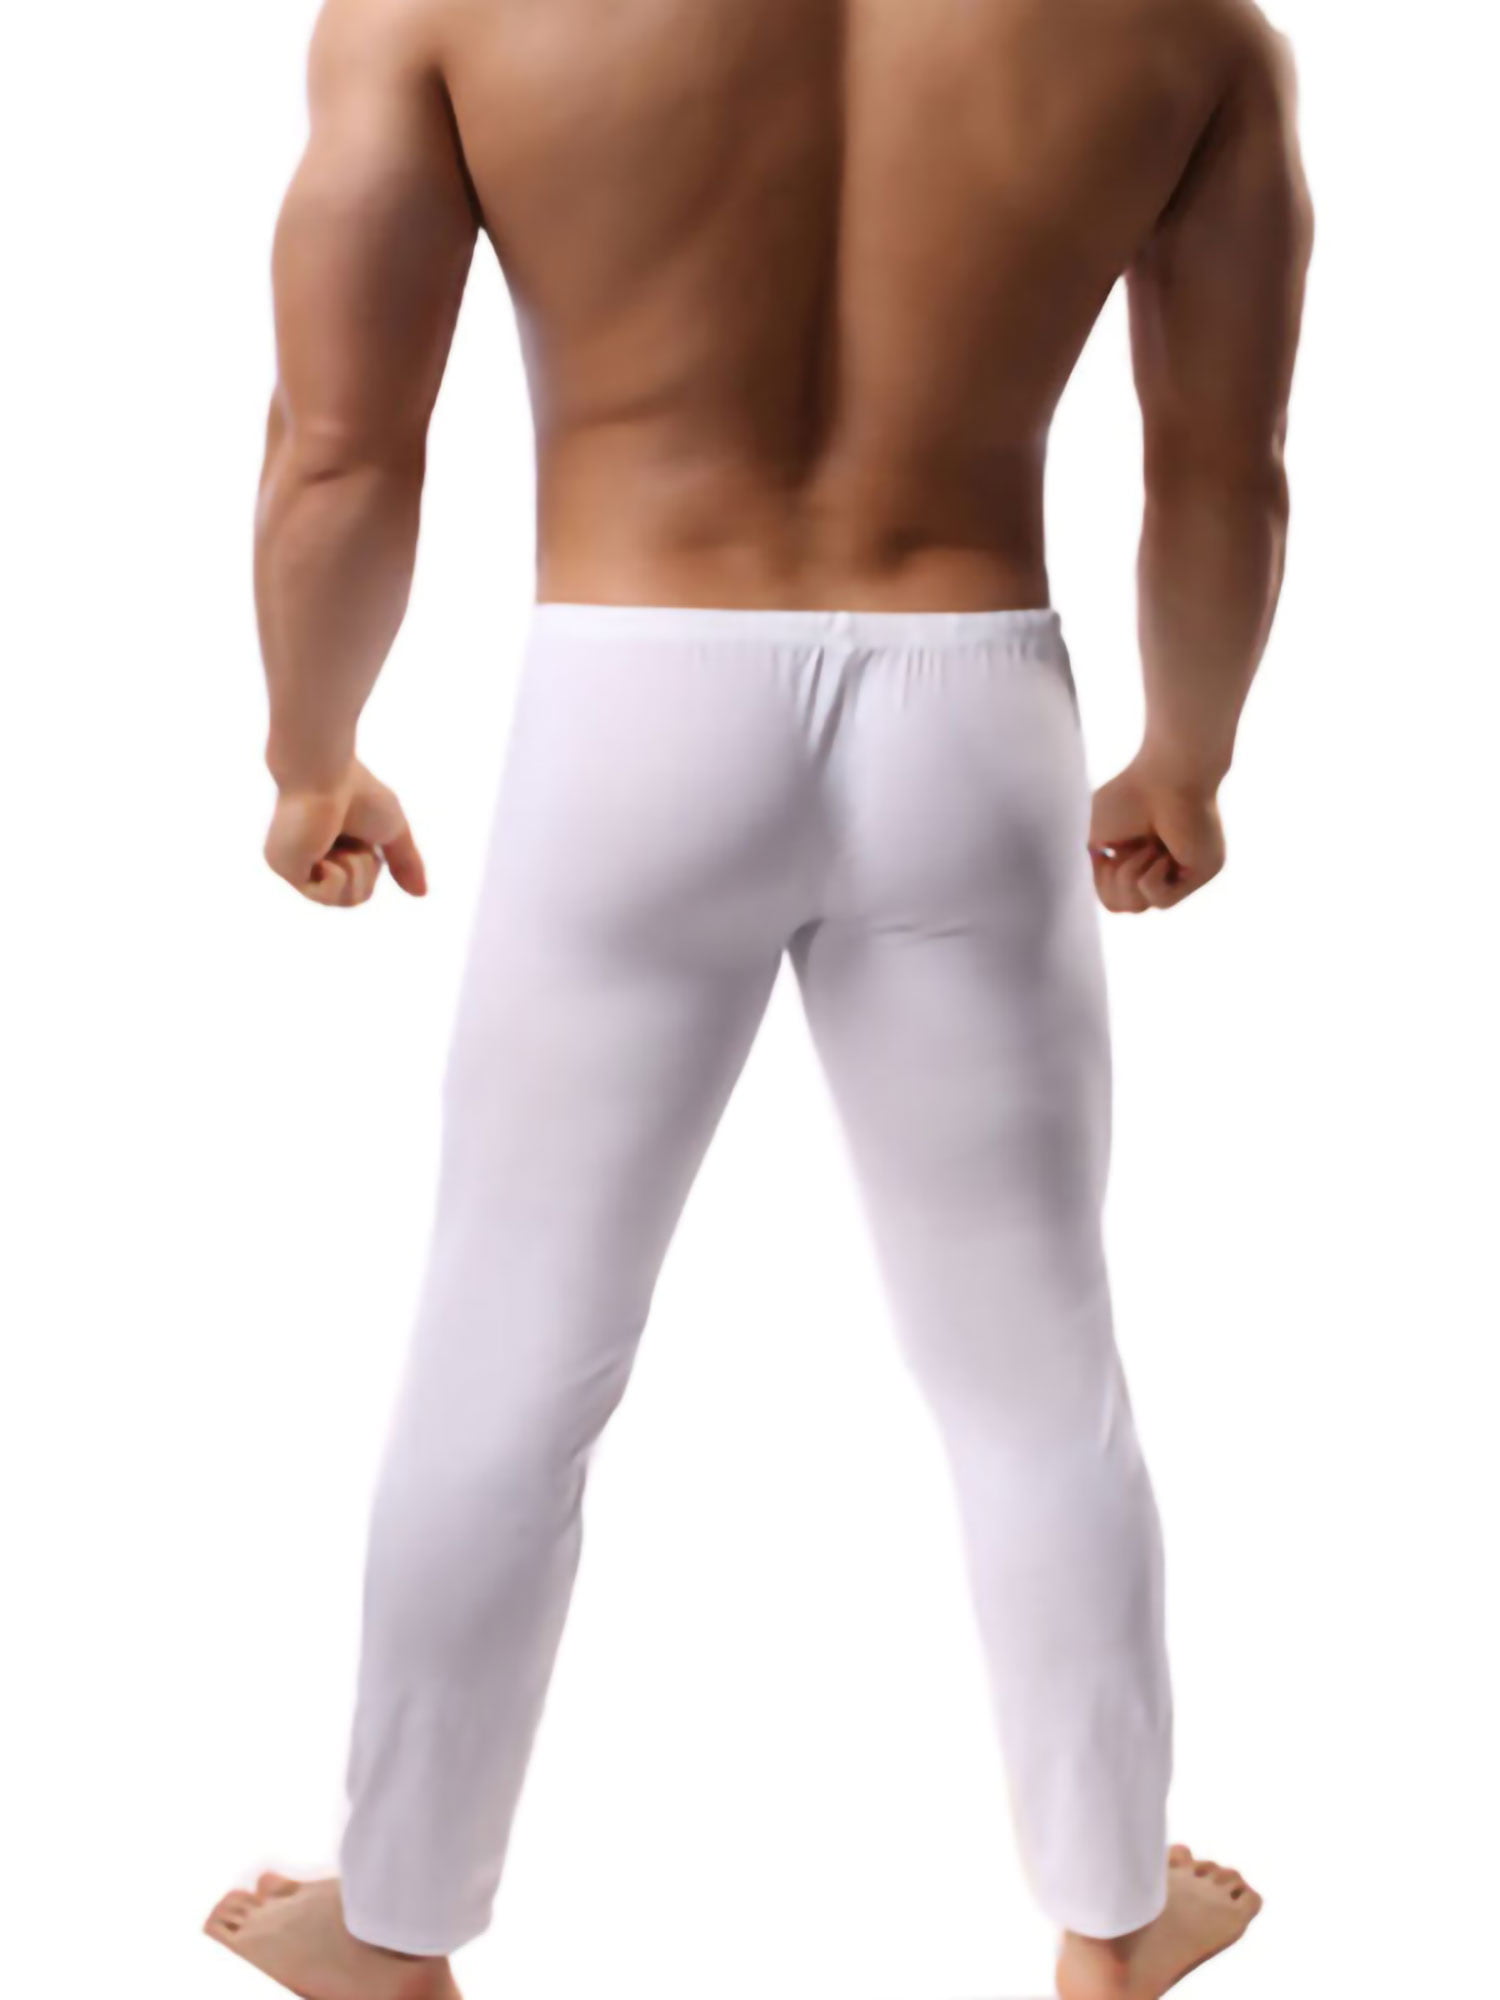 HOM long johns base layer Business HO1 inners PJ bottoms Underwear thermal pant 